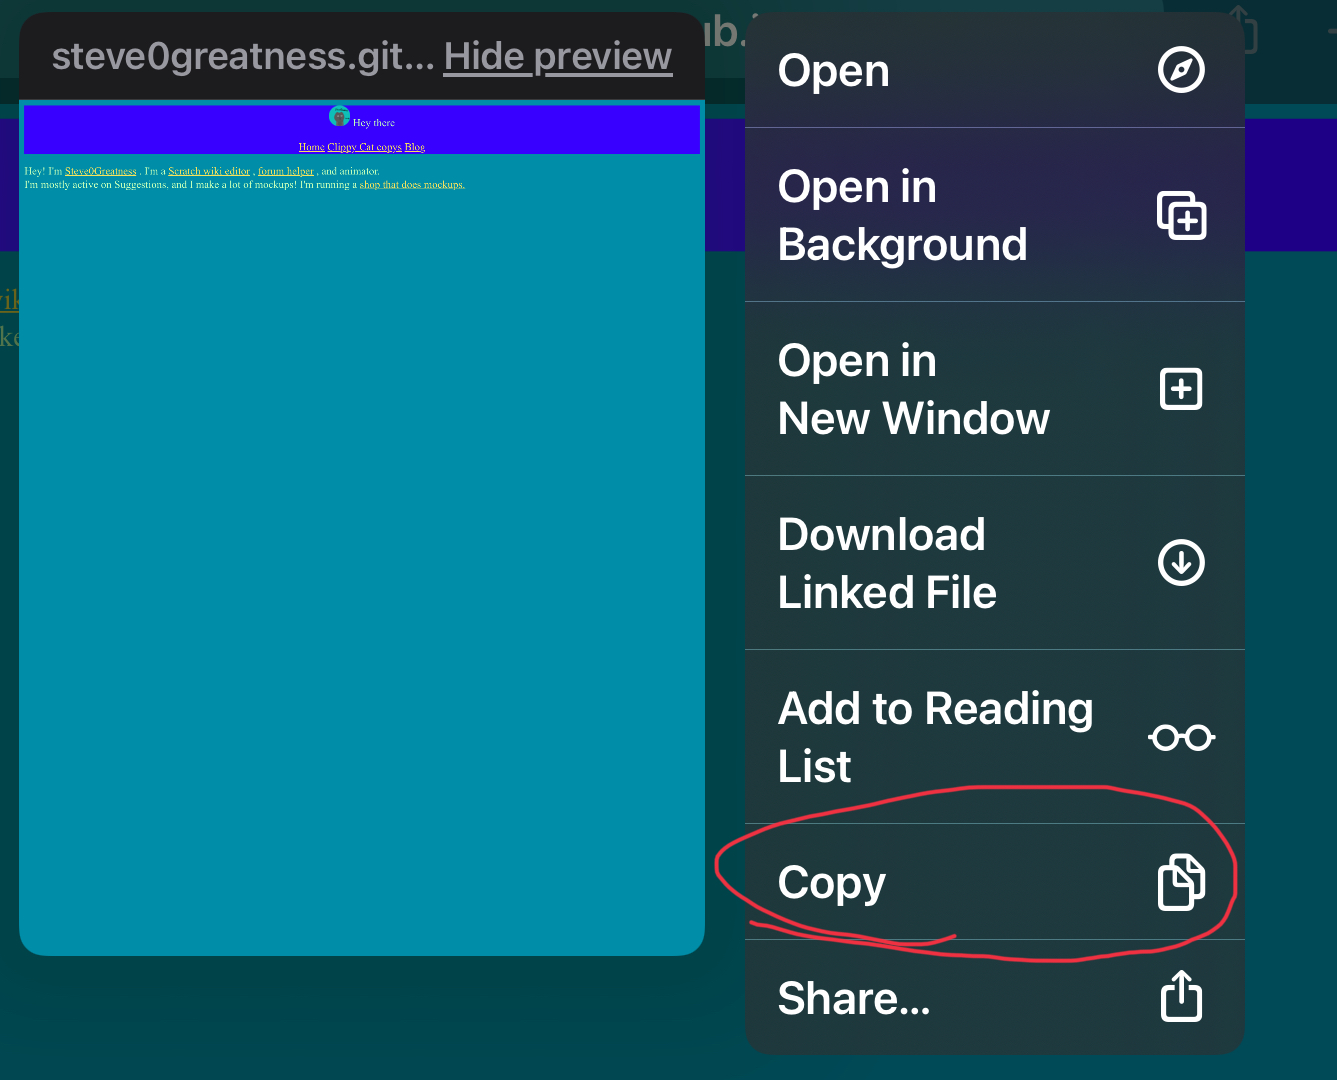 open, open in background, open in new window, download link file, add to reading list, *copy*, share